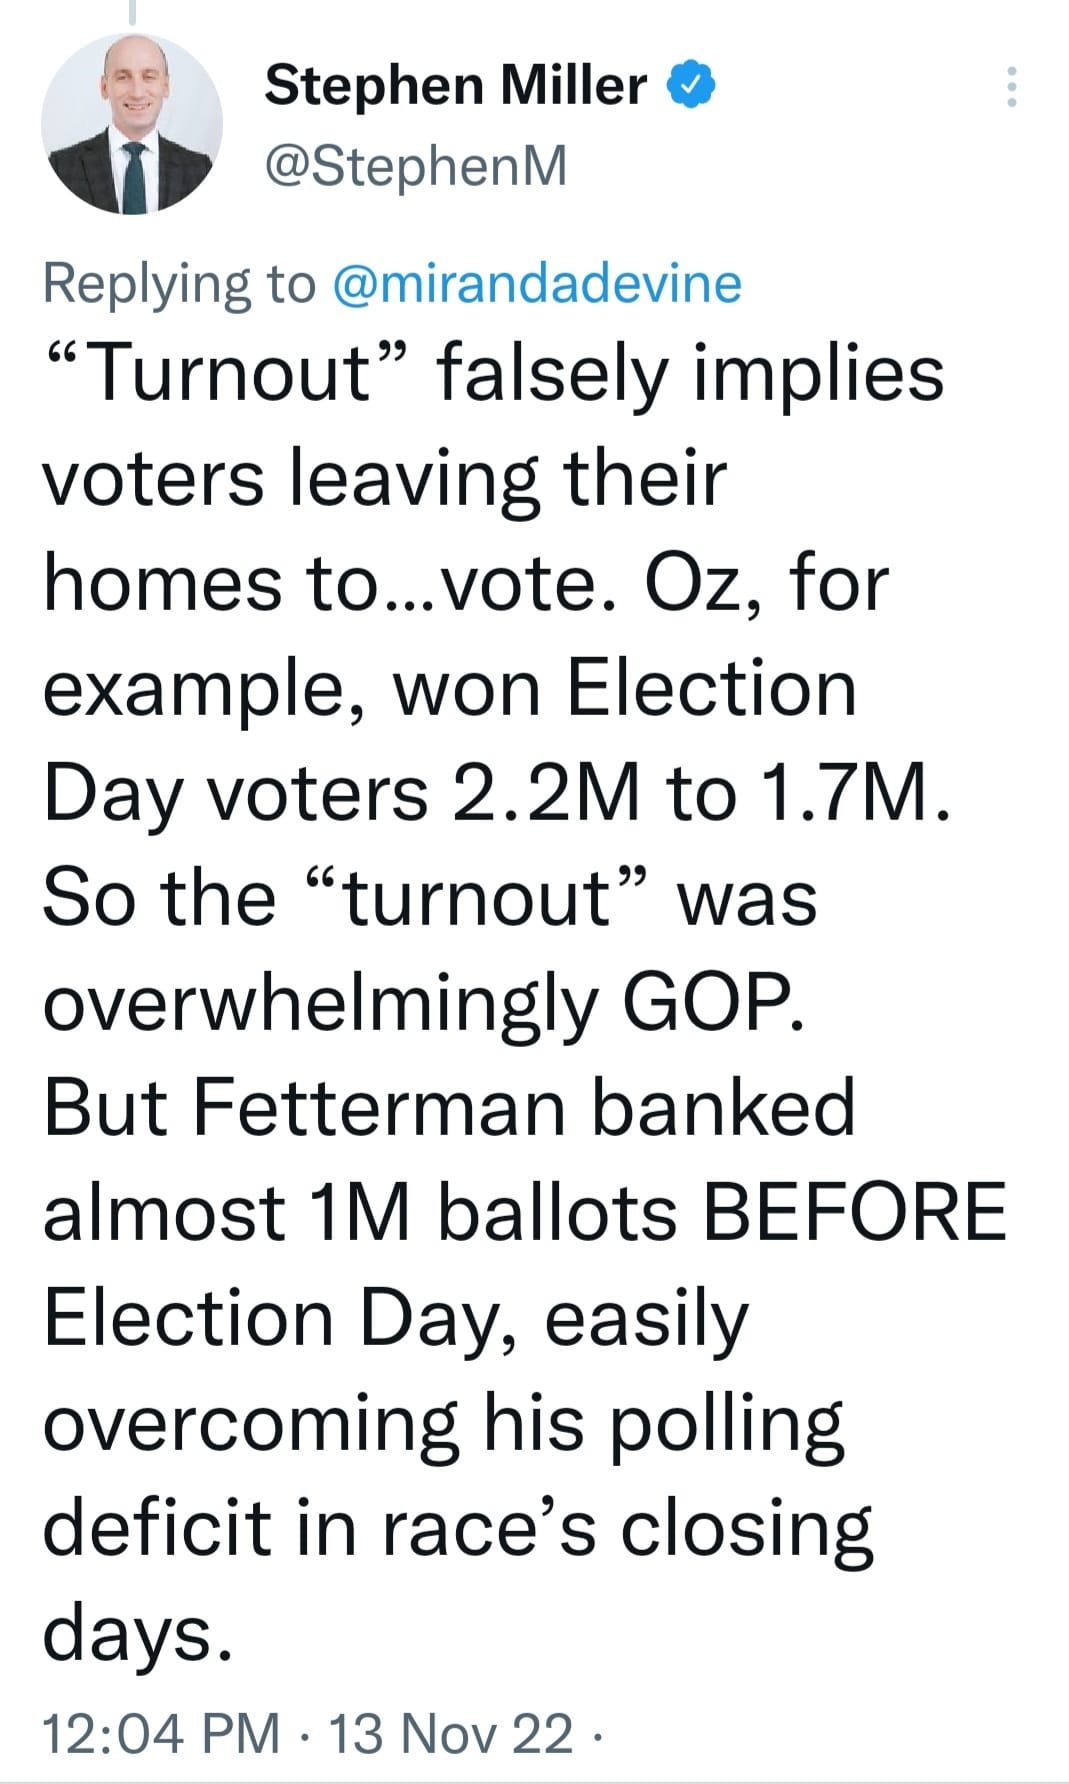 May be an image of 1 person and text that says 'Stephen Miller @StephenM Replying to @mirandadevine "Turnout" falsely implies voters leaving their homes to...vote. Oz, for example, won Election Day voters 2.2M to 1.7M. So the "turnout" was overwhelmingly GOP. But Fetterman banked almost 1M ballots BEFORE Election Day, easily overcoming his polling deficit in race's closing days. 12:04 PM 13 Nov 22.'